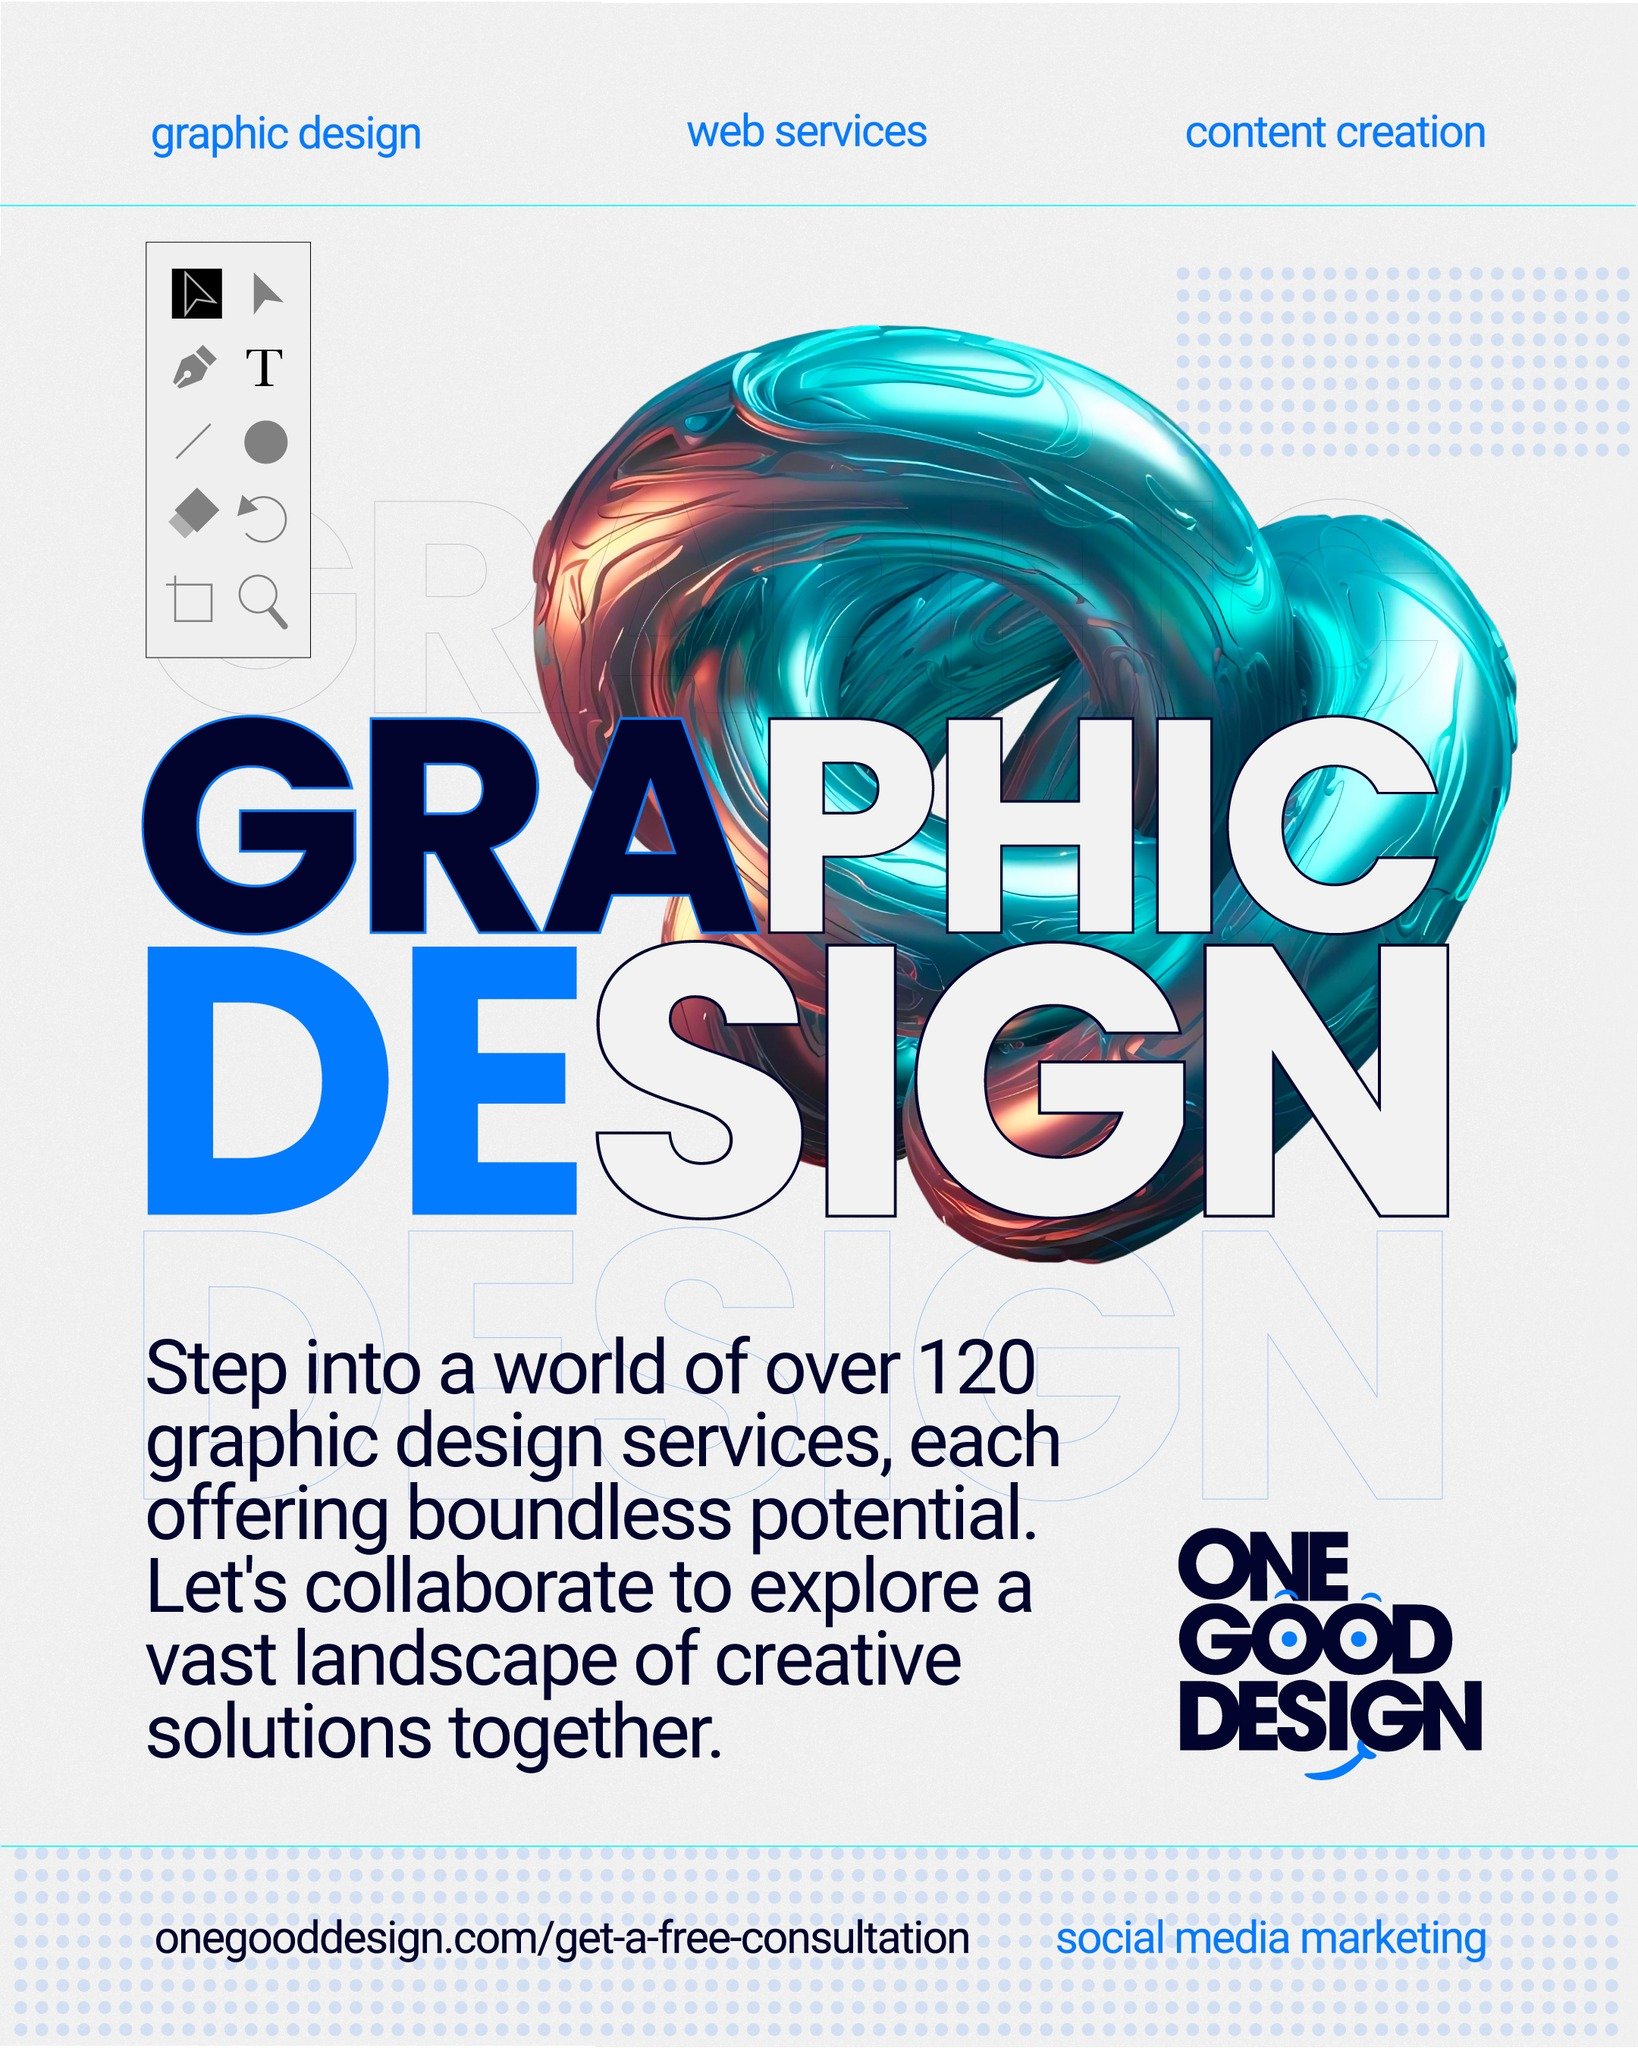 When vision and visual design converge, the impact is unmistakable. Our portfolio boasts over 120 graphic design services, each one a piece in the puzzle of your brand's comprehensive story.

Your strategic goals become our design roadmap. Together, 